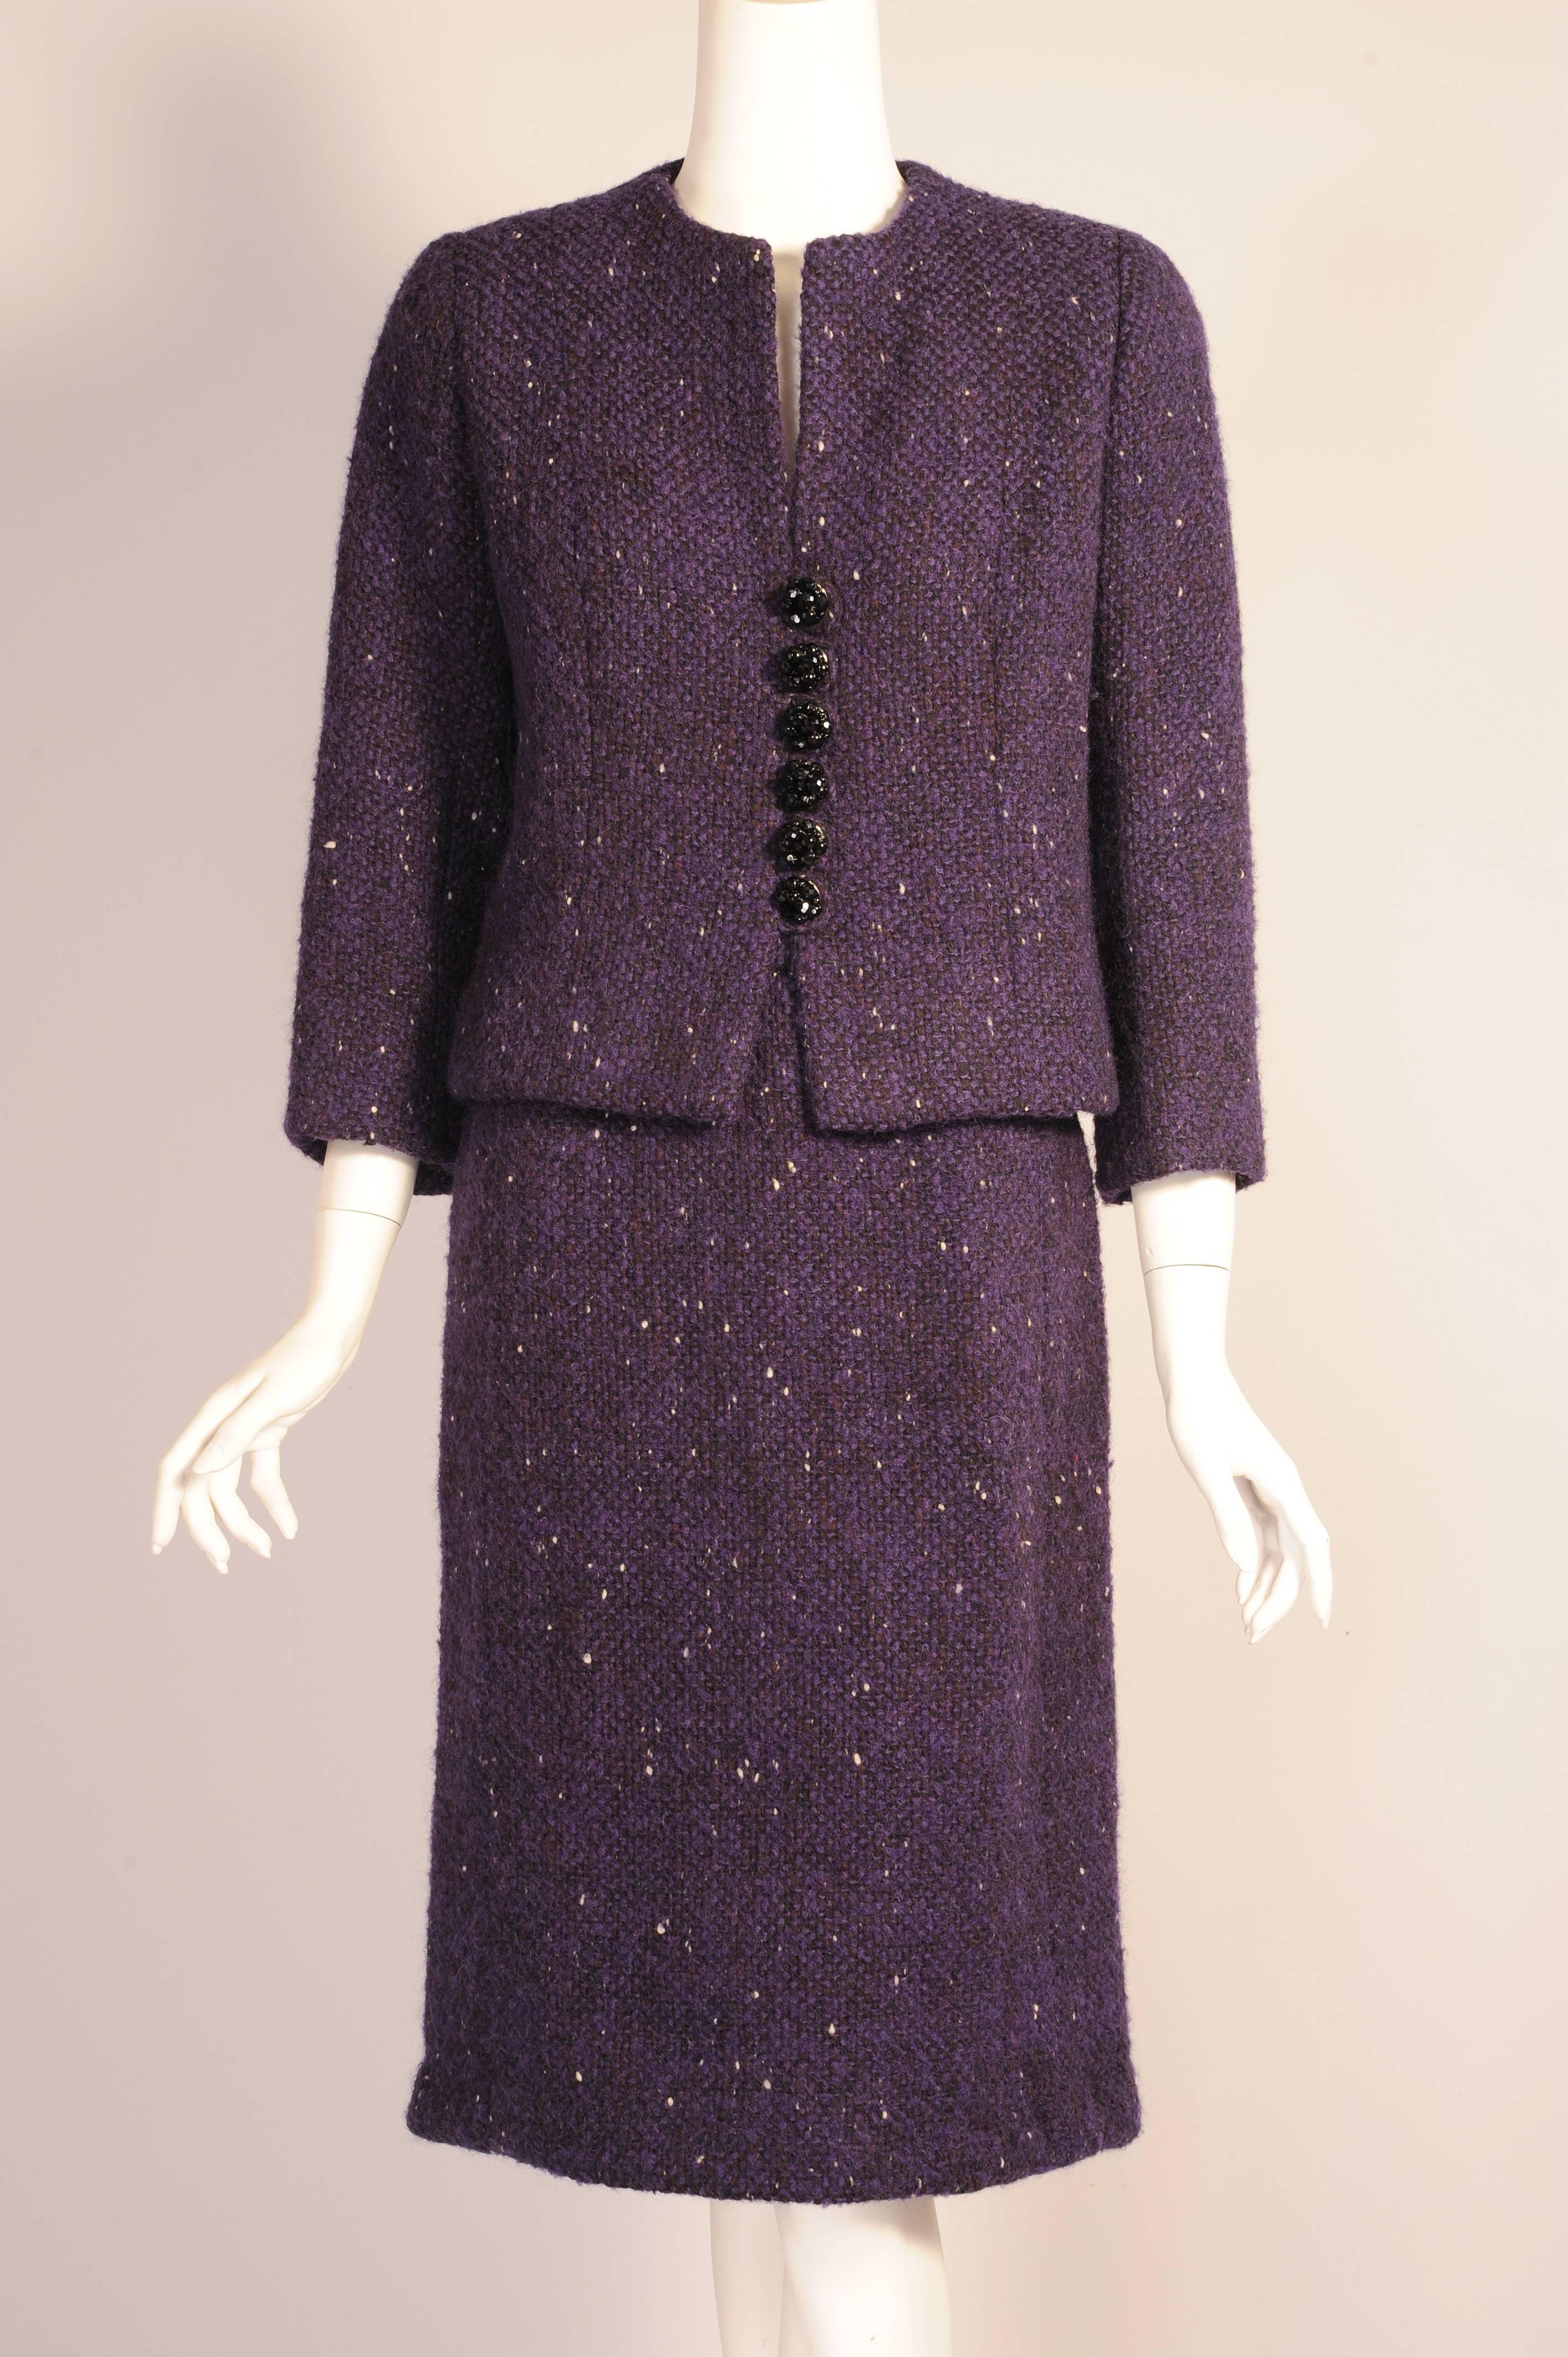 A classic 1960's design from the master of haute couture, this Balenciaga suit was designed for his Spanish Line, Eisa. The collarless jacket has black jet beads and fabric loops as the only ornamentation. The skirt sits at the natural waistline and